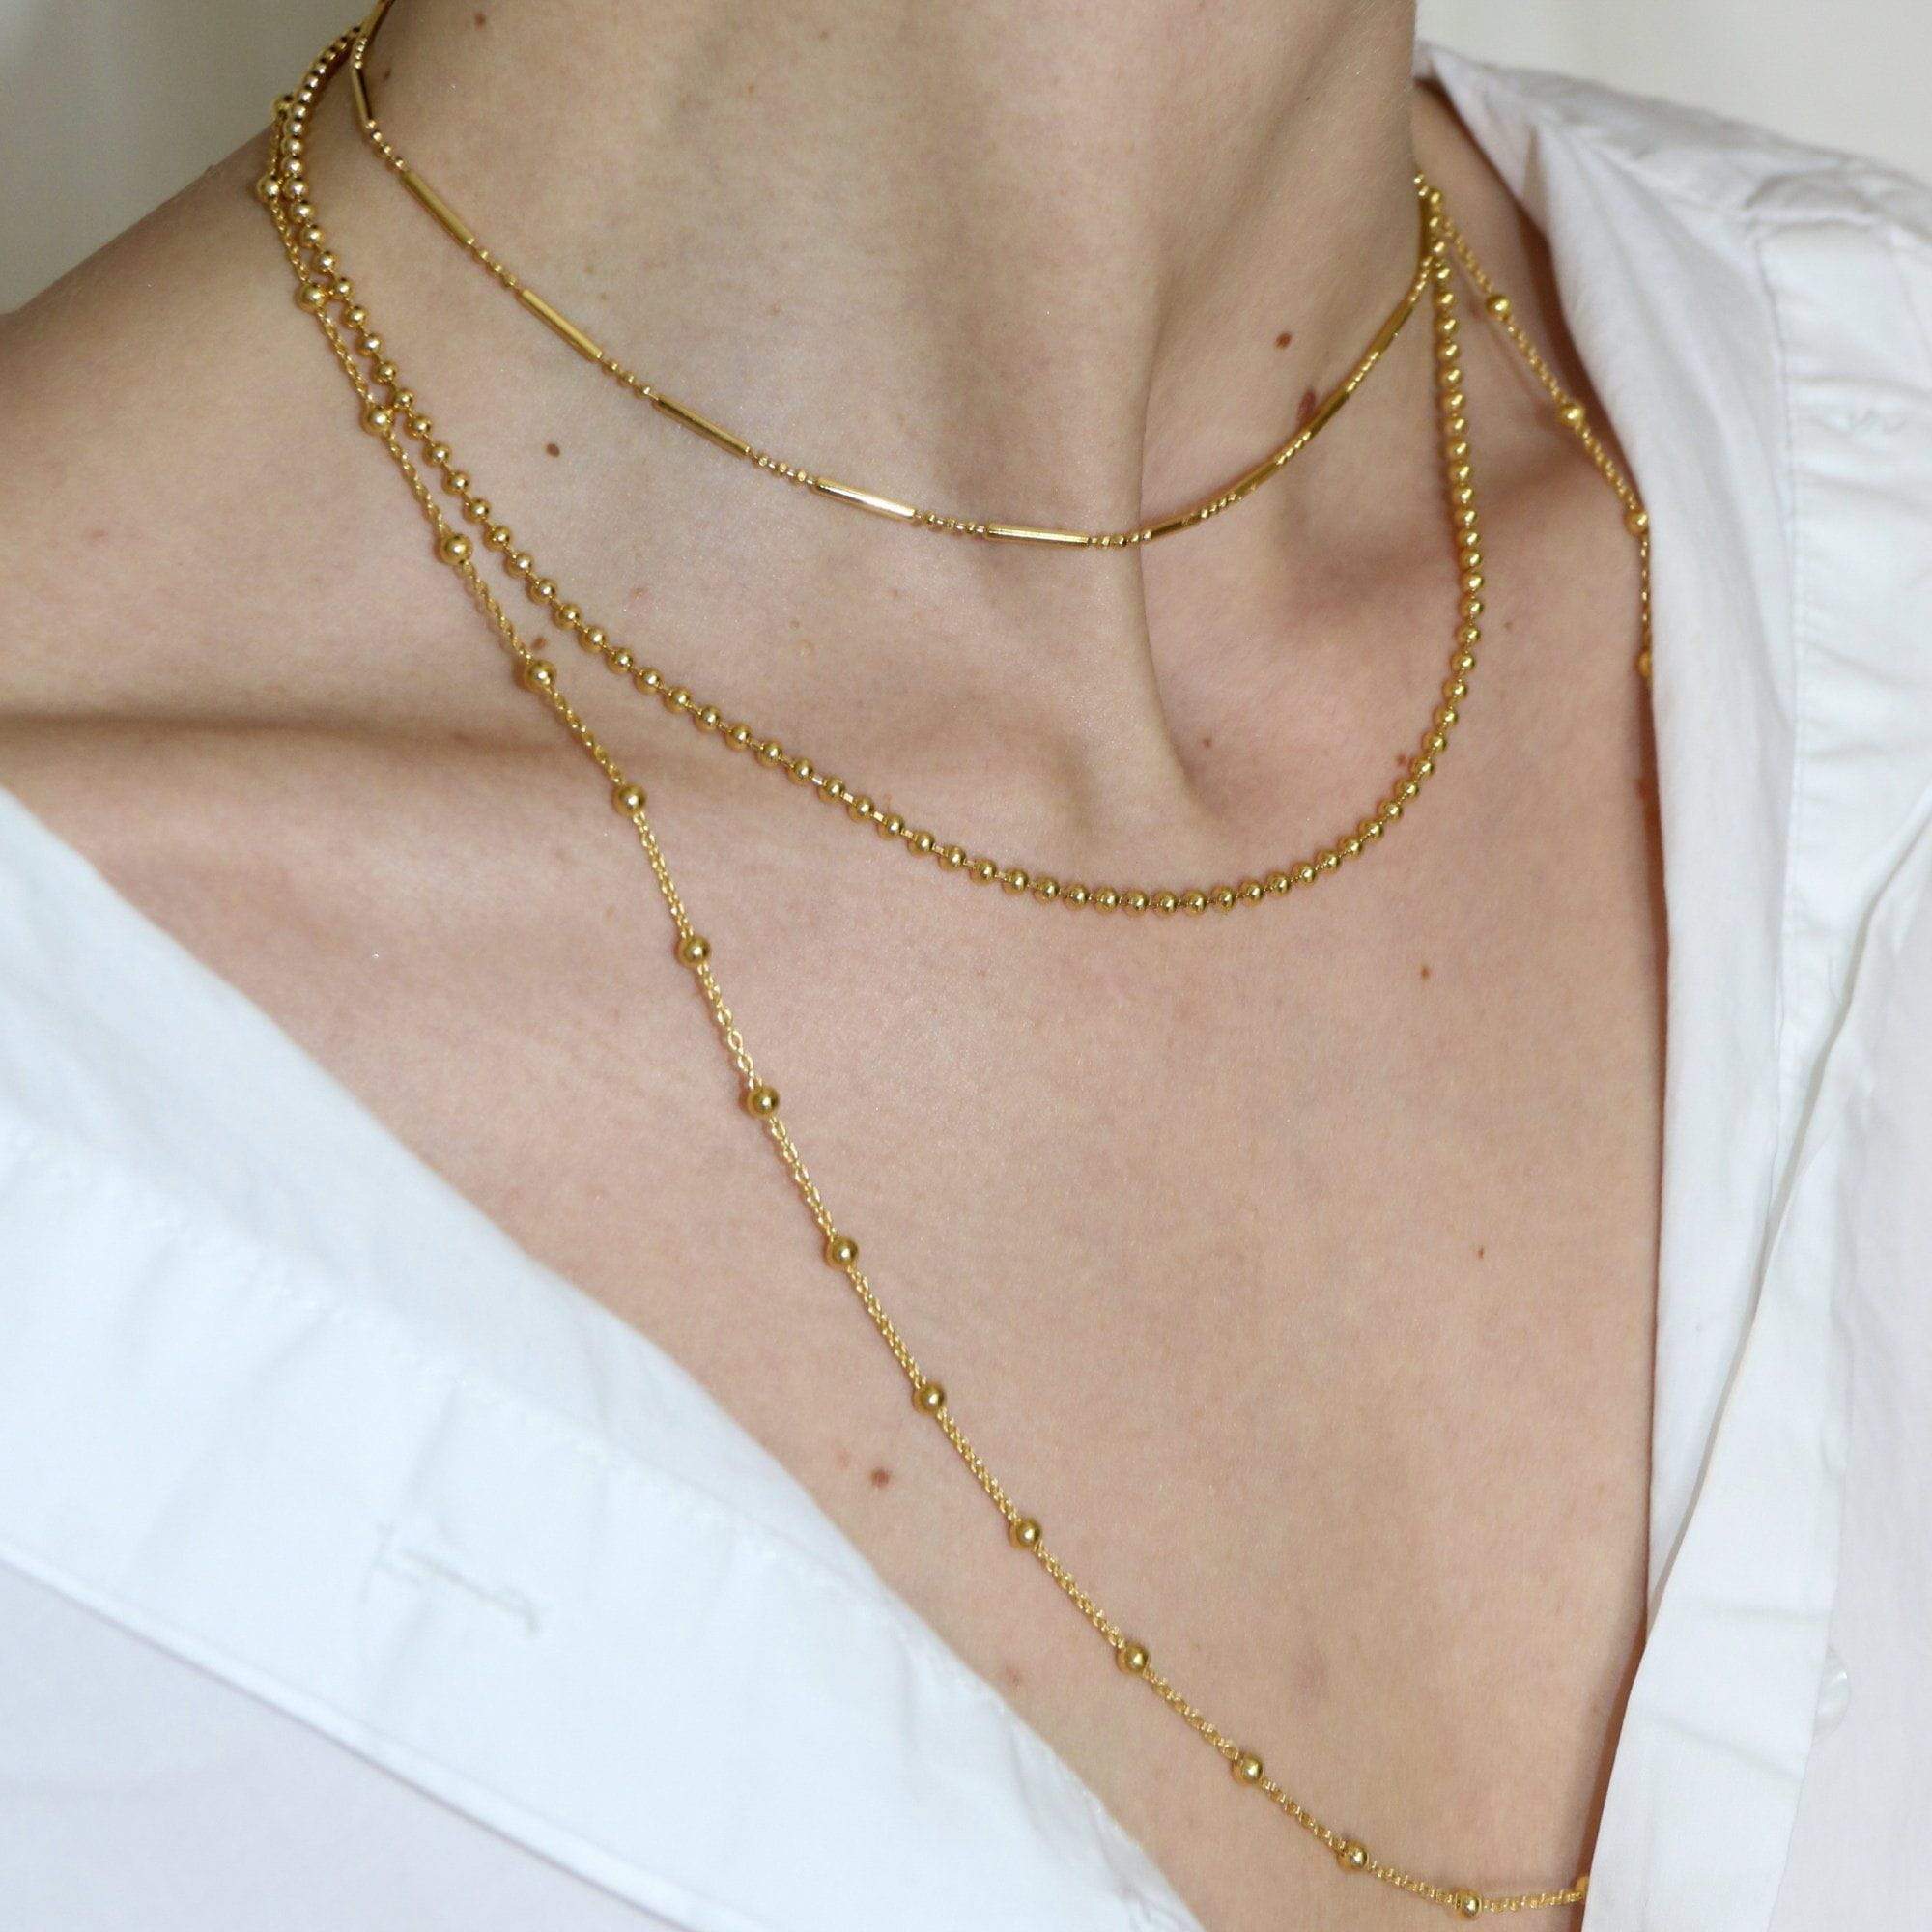  Layering Set - Bamboo Choker, Ball Chain and Long Satellite Necklace Set - by Scream Pretty